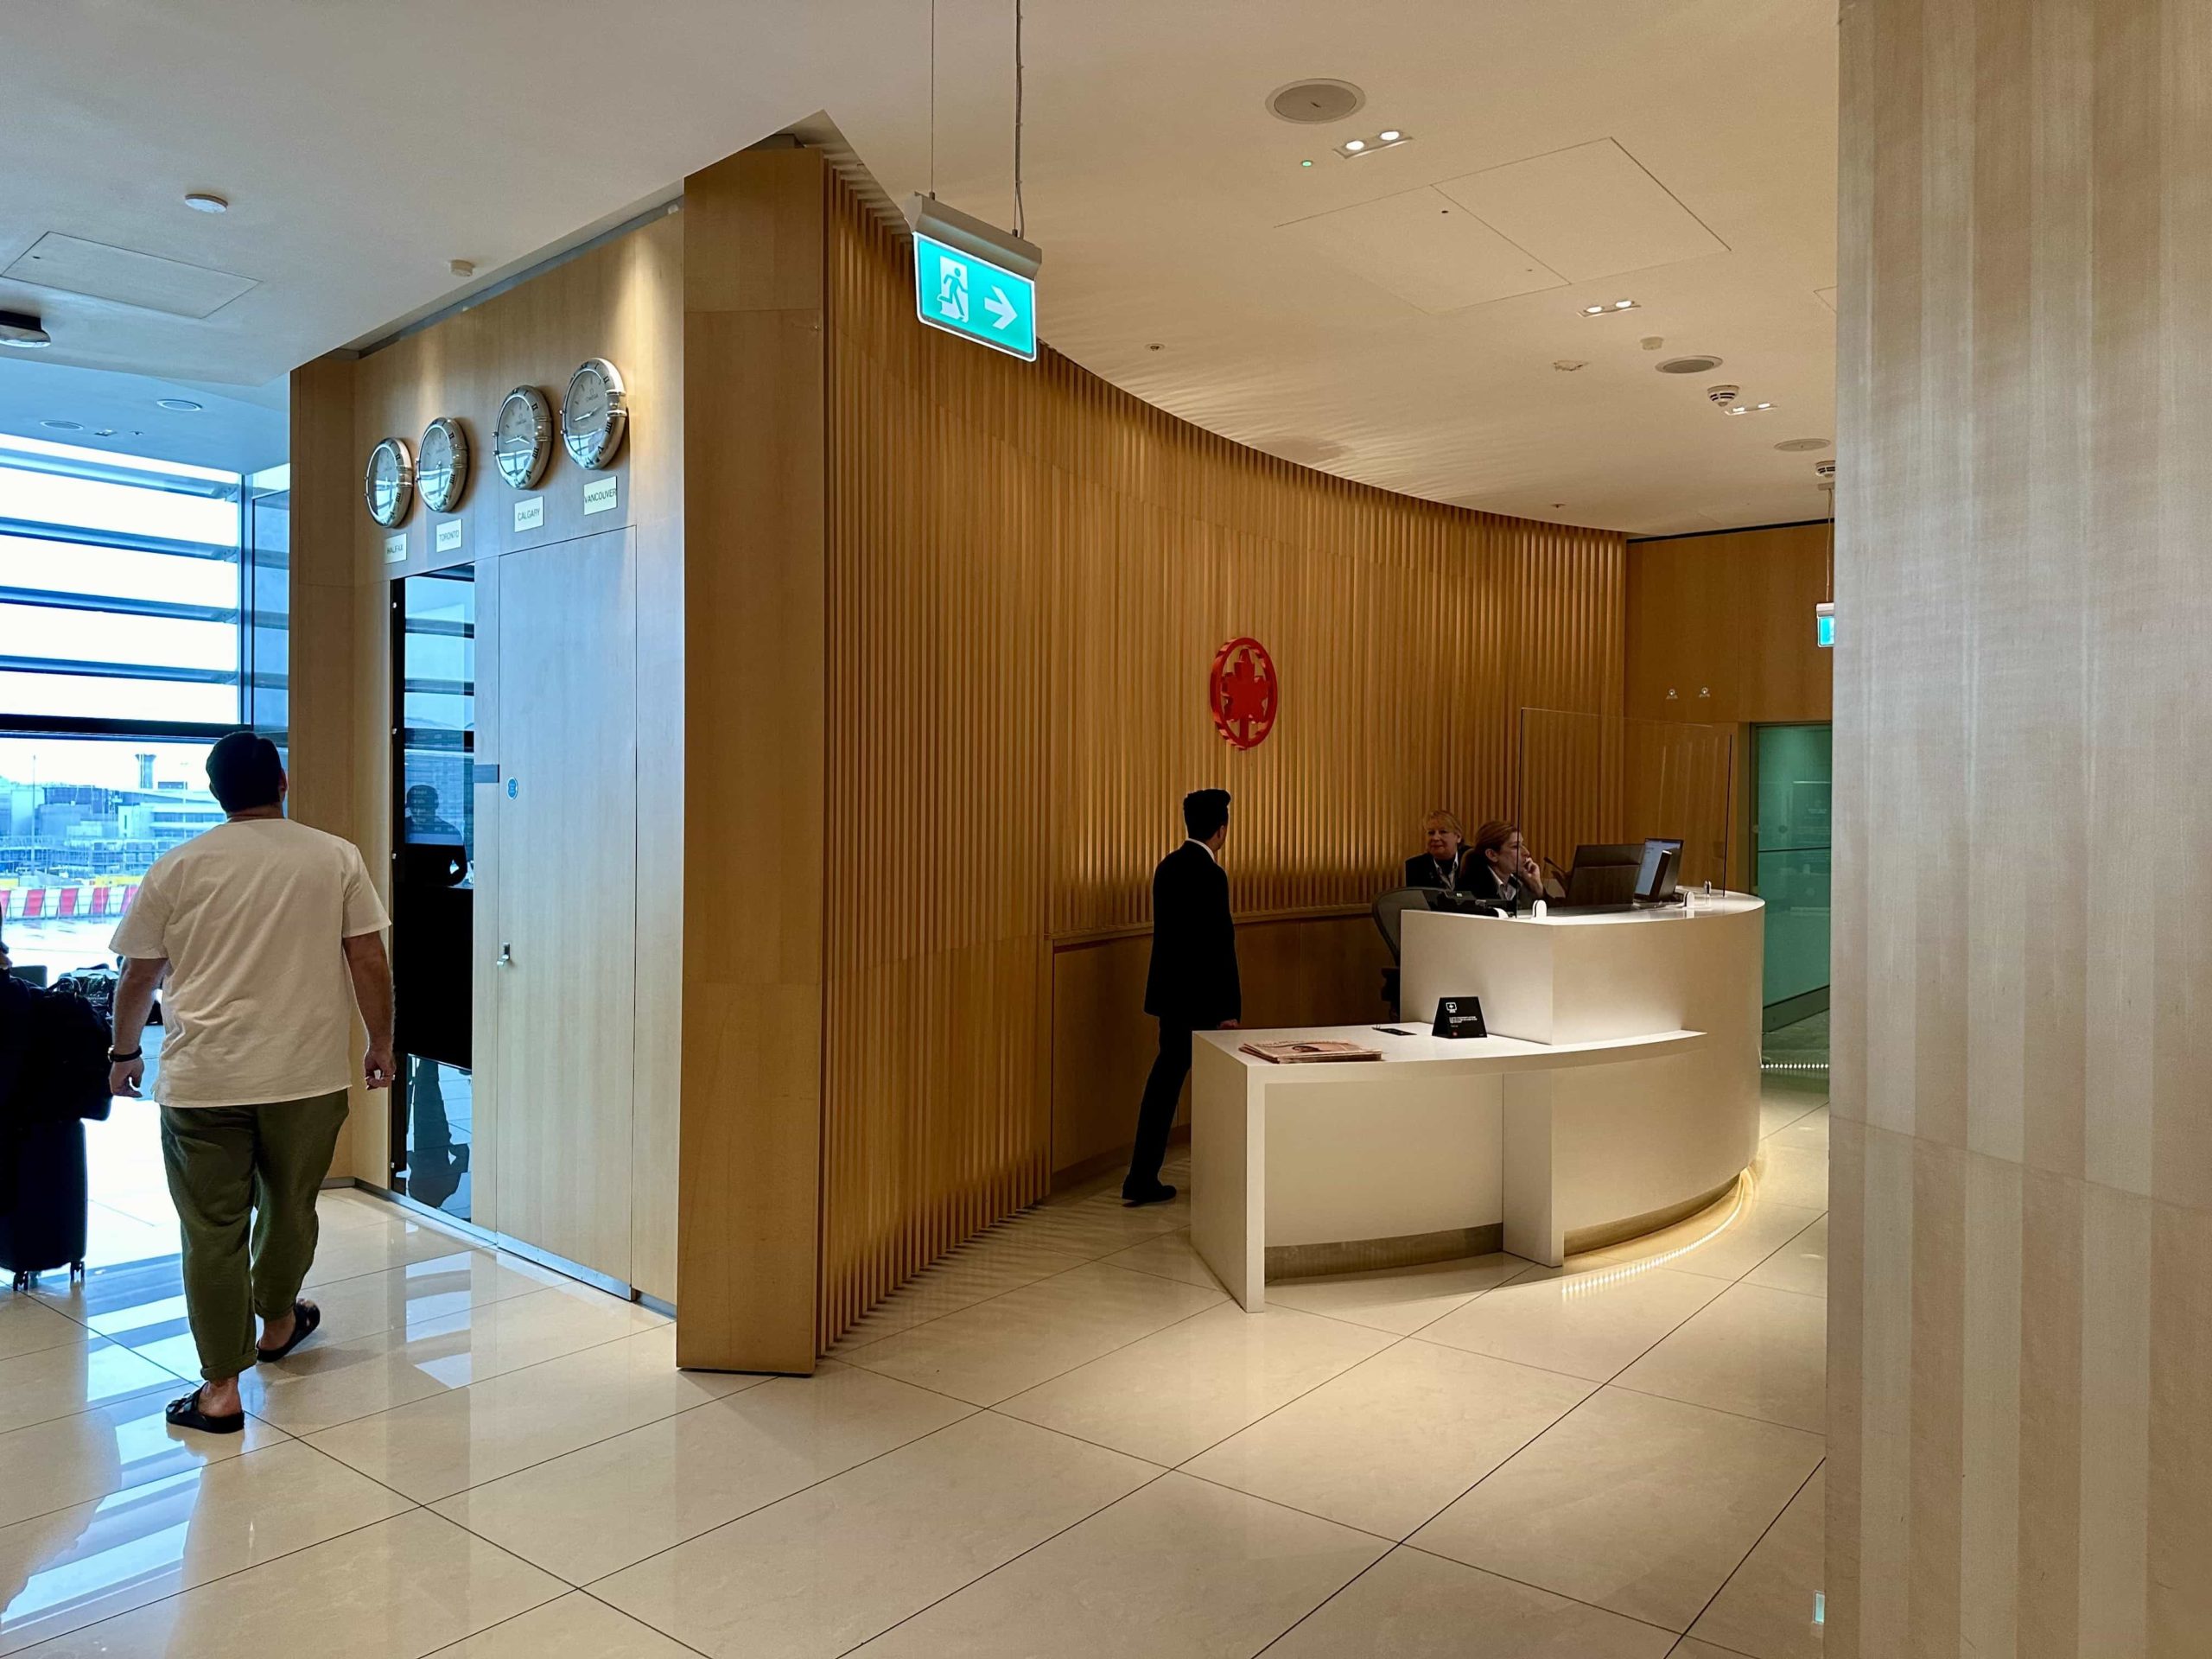 The lobby area and reception desk at the Air Canada Maple Leaf Lounge